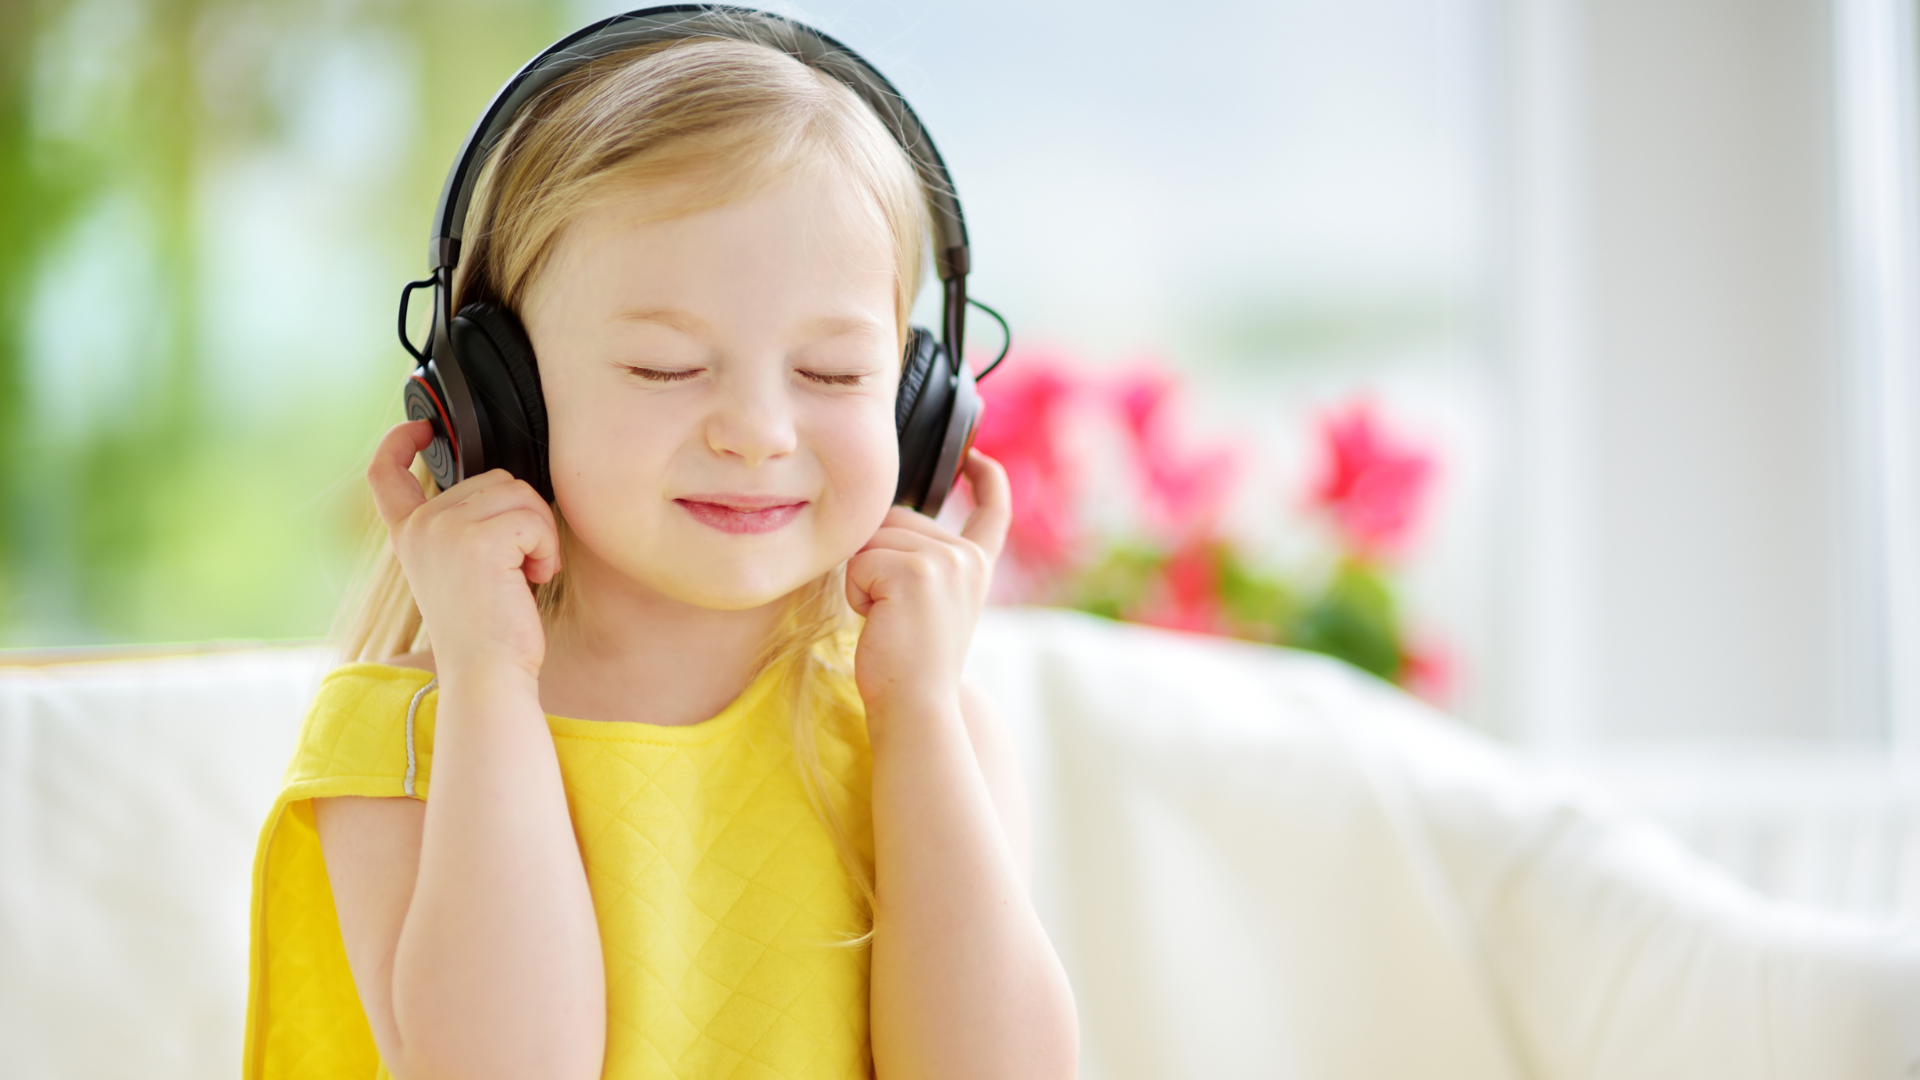 Ways to Enhance Your Child’s Everyday Activities With Music